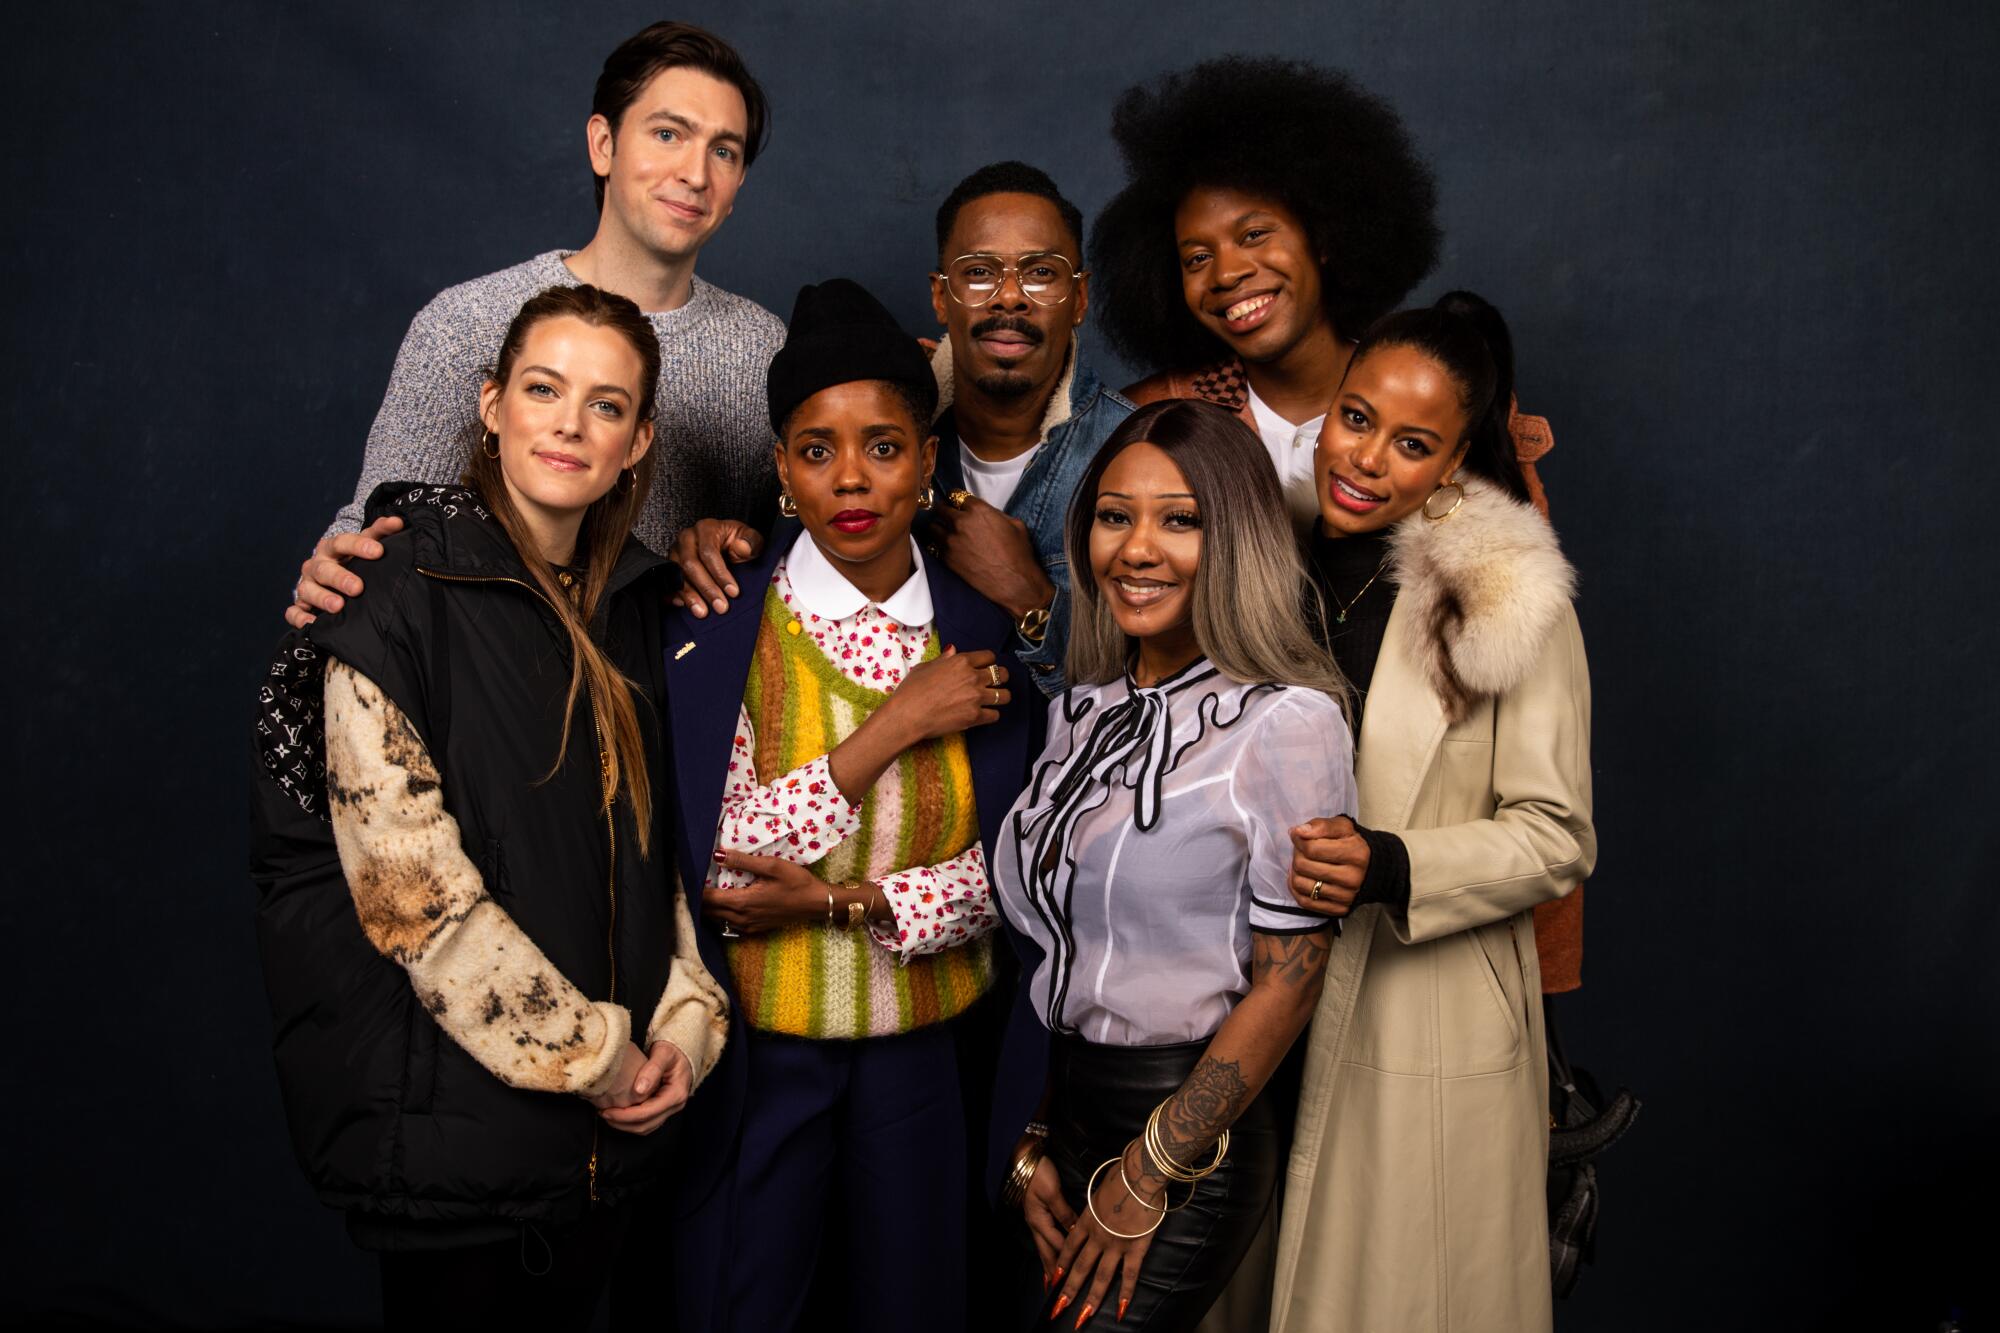 Actors Riley Keough and Nicholas Braun, director/co-writer Janicza Bravo, actor Colman Domingo, subject A’Ziah King, co-writer Jeremy O. Harris and actor Taylour Paige of “Zola”